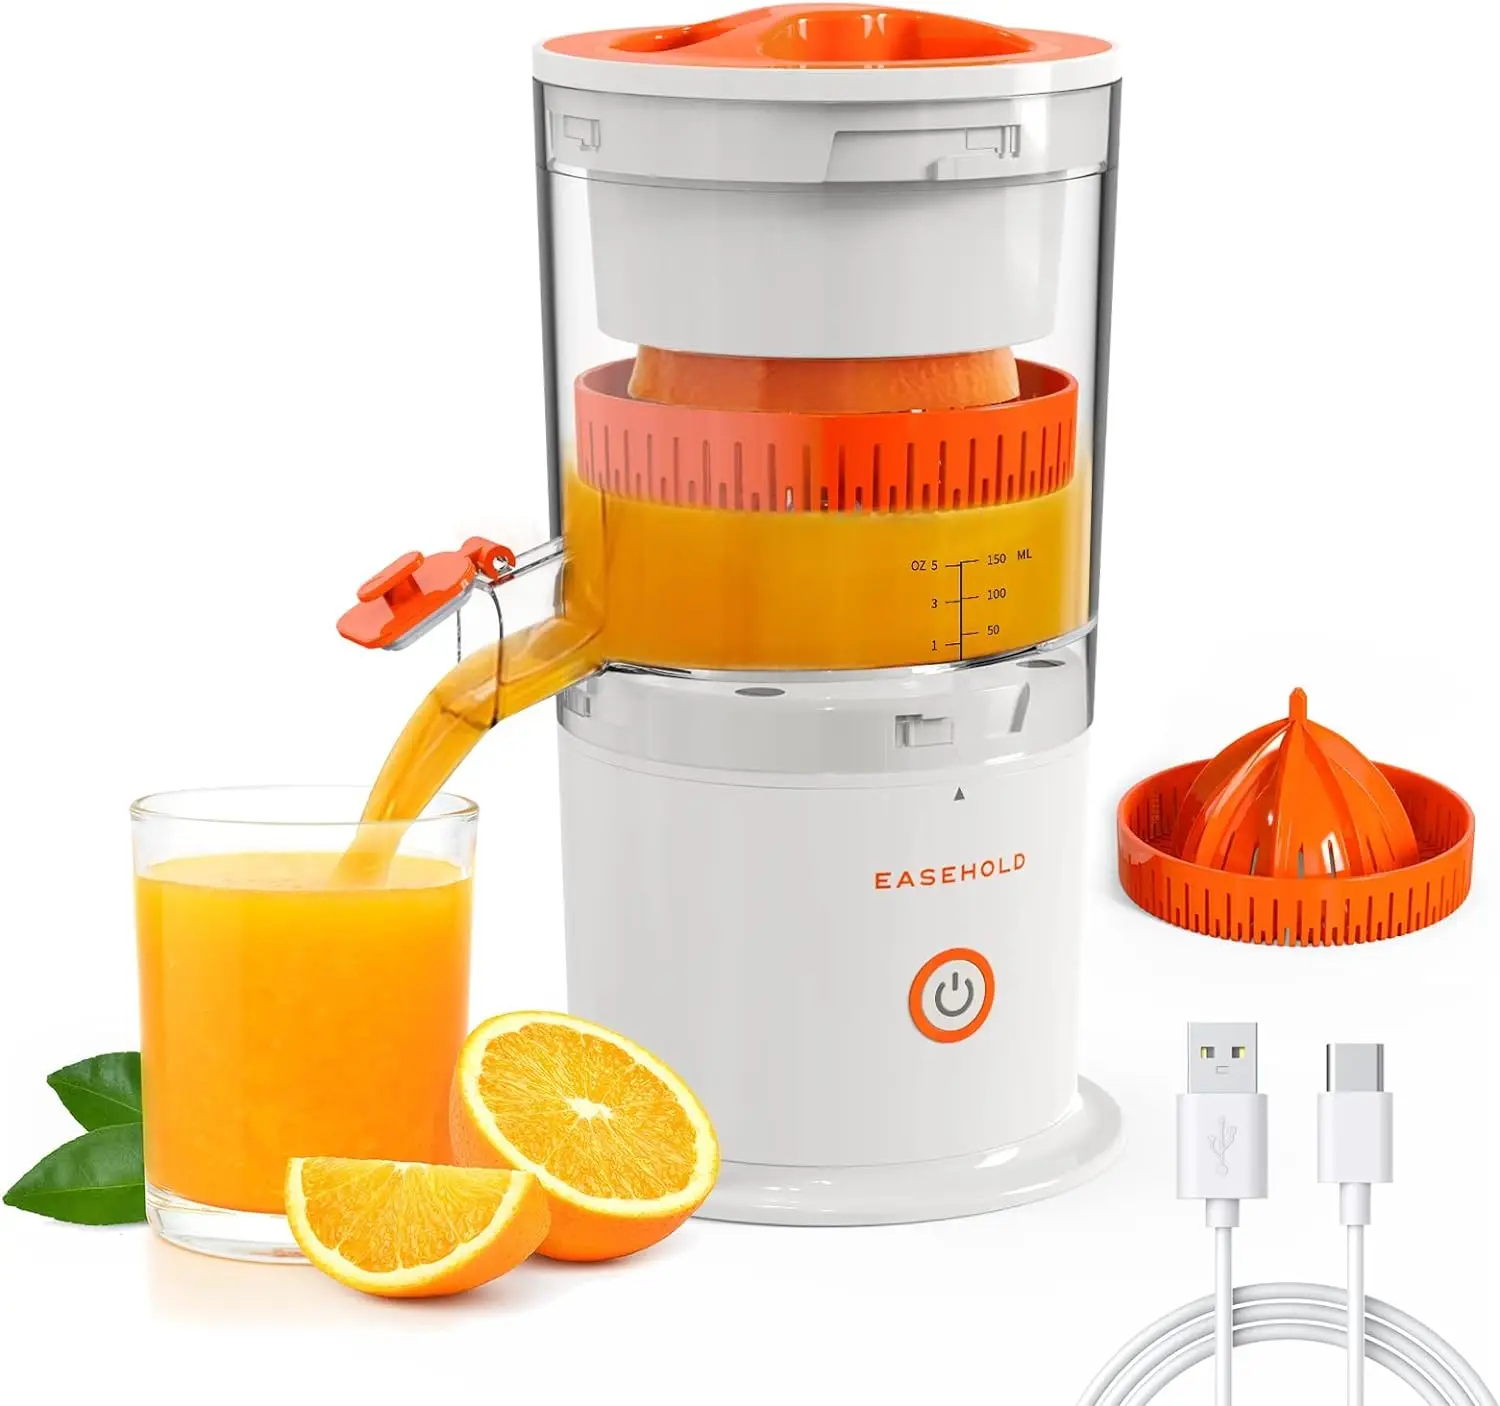 

Juicer, Portable Juicer Rechargeable with 2 Juicer Cones and USB, Orange Juice Squeezer for Lemon, Lime, Grapefruit - Automatic